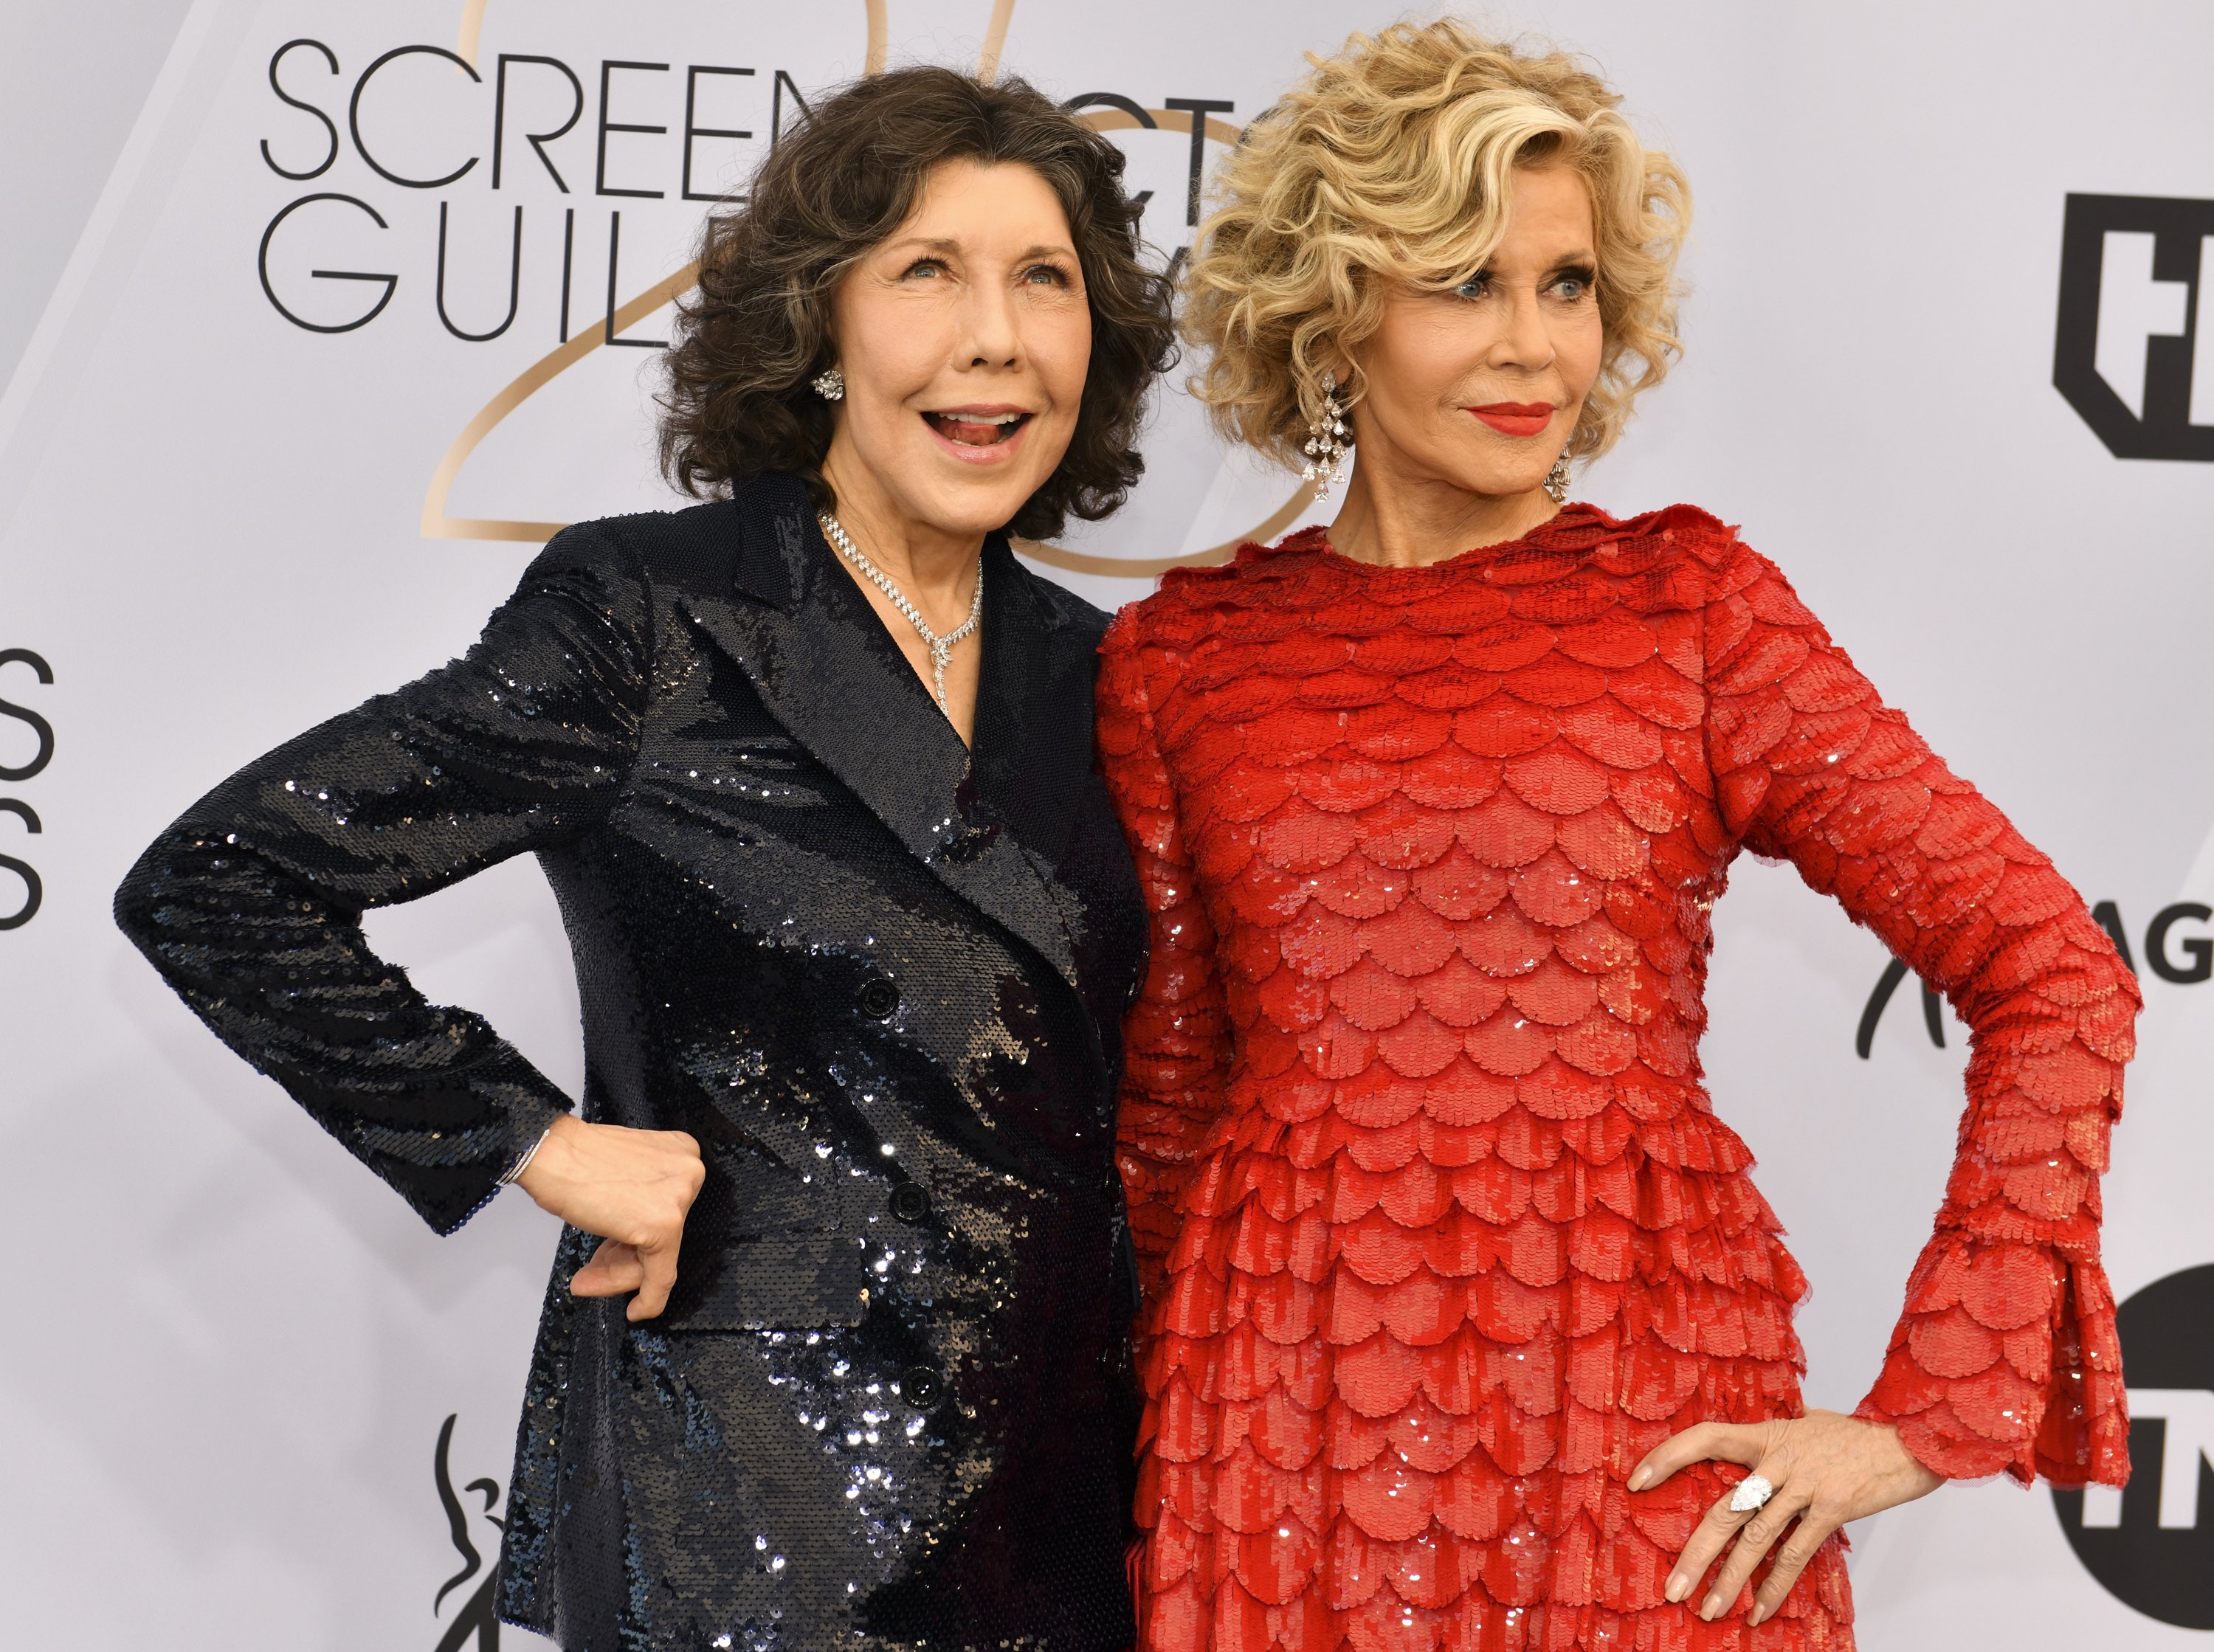 Lily Tomlin and Jane Fonda arrive at the 25th Annual Screen Actors Guild Awards on January 27, 2019 | Photo: GettyImages